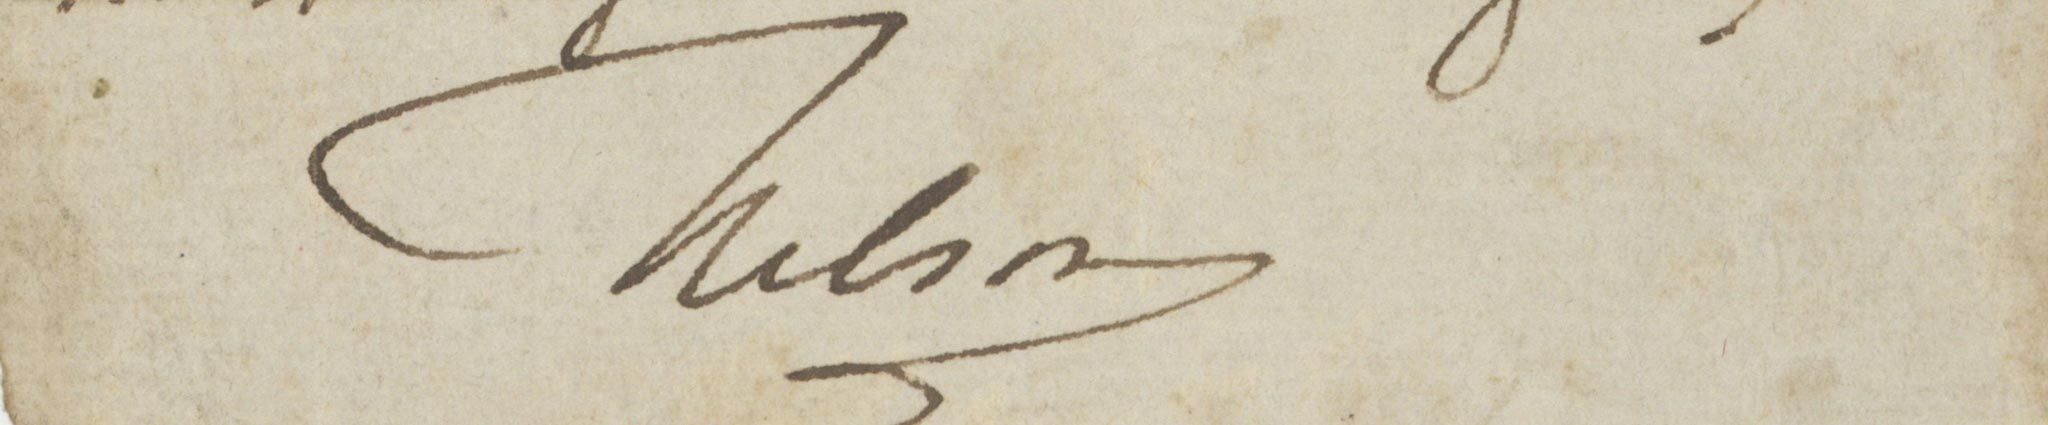 APS A clipped signature, "Nelson", c.1800. Overall size approx. 25 x 115mm APS A clipped